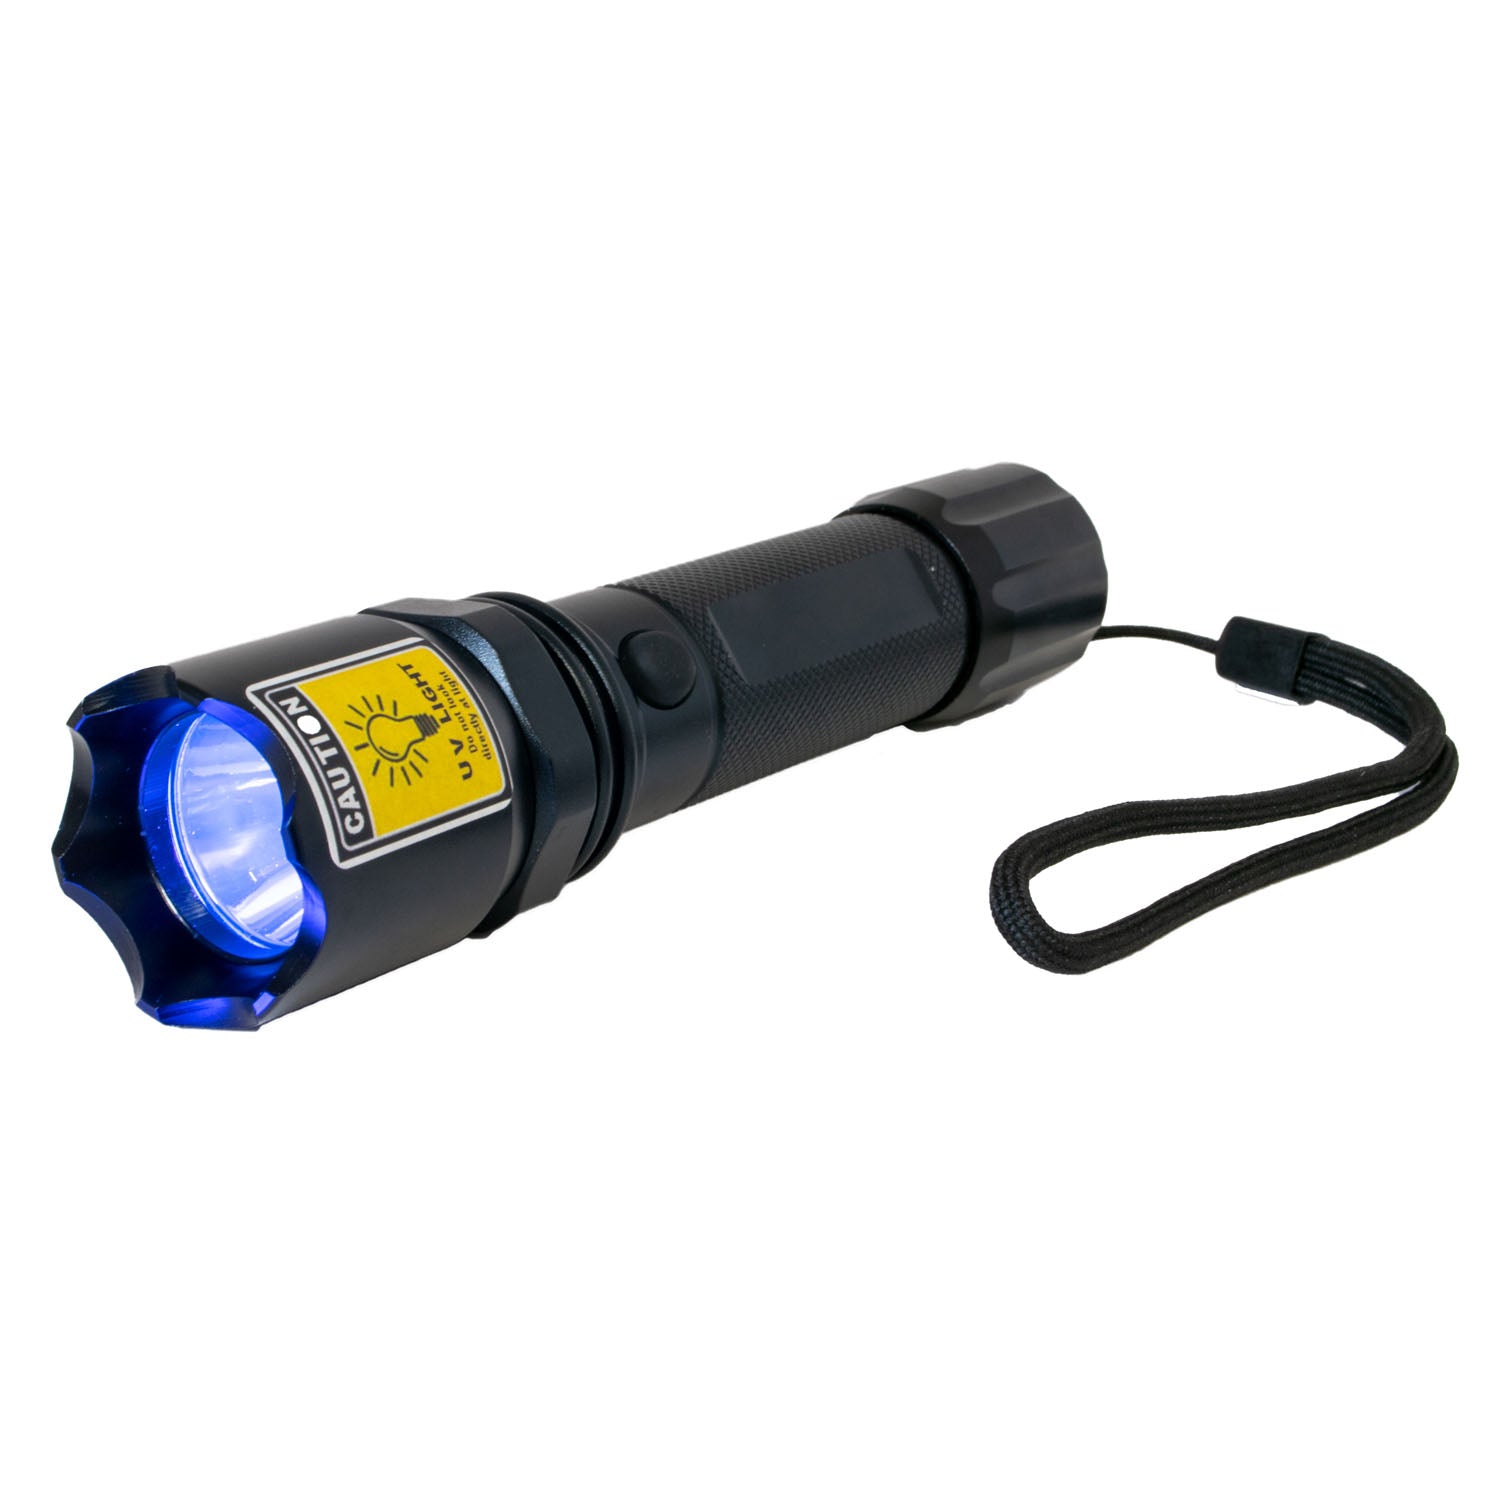 UV torch 5W + 18650 battery + charger